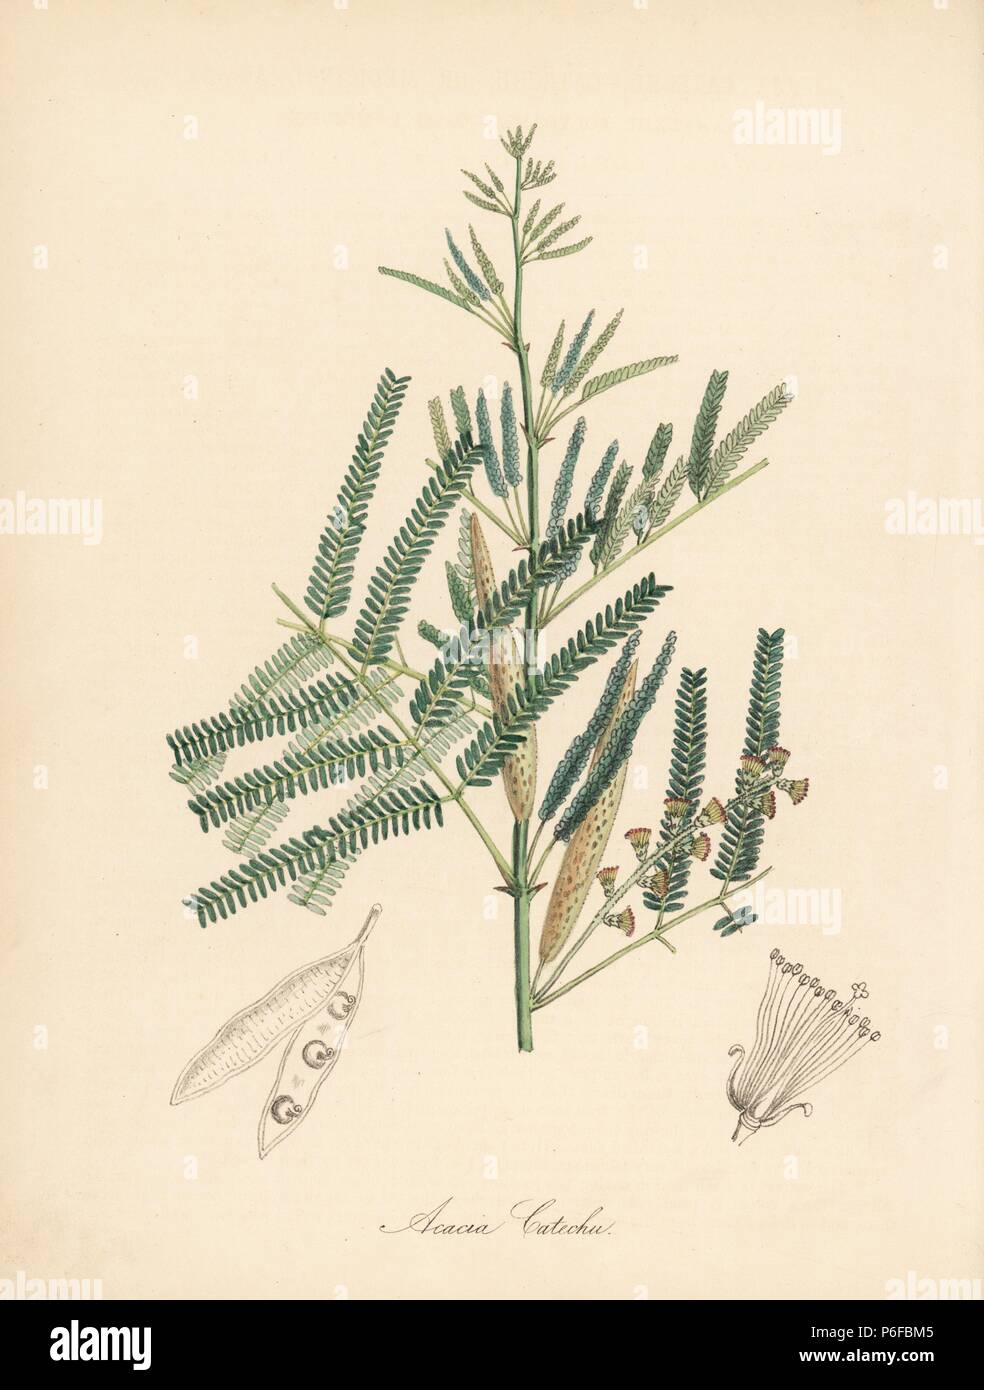 Catechu or medicinal acacia, Acacia catechu. Handcoloured zincograph by C. Chabot drawn by Miss M. A. Burnett from her 'Plantae Utiliores: or Illustrations of Useful Plants,' Whittaker, London, 1842. Miss Burnett drew the botanical illustrations, but the text was chiefly by her late brother, British botanist Gilbert Thomas Burnett (1800-1835). Stock Photo